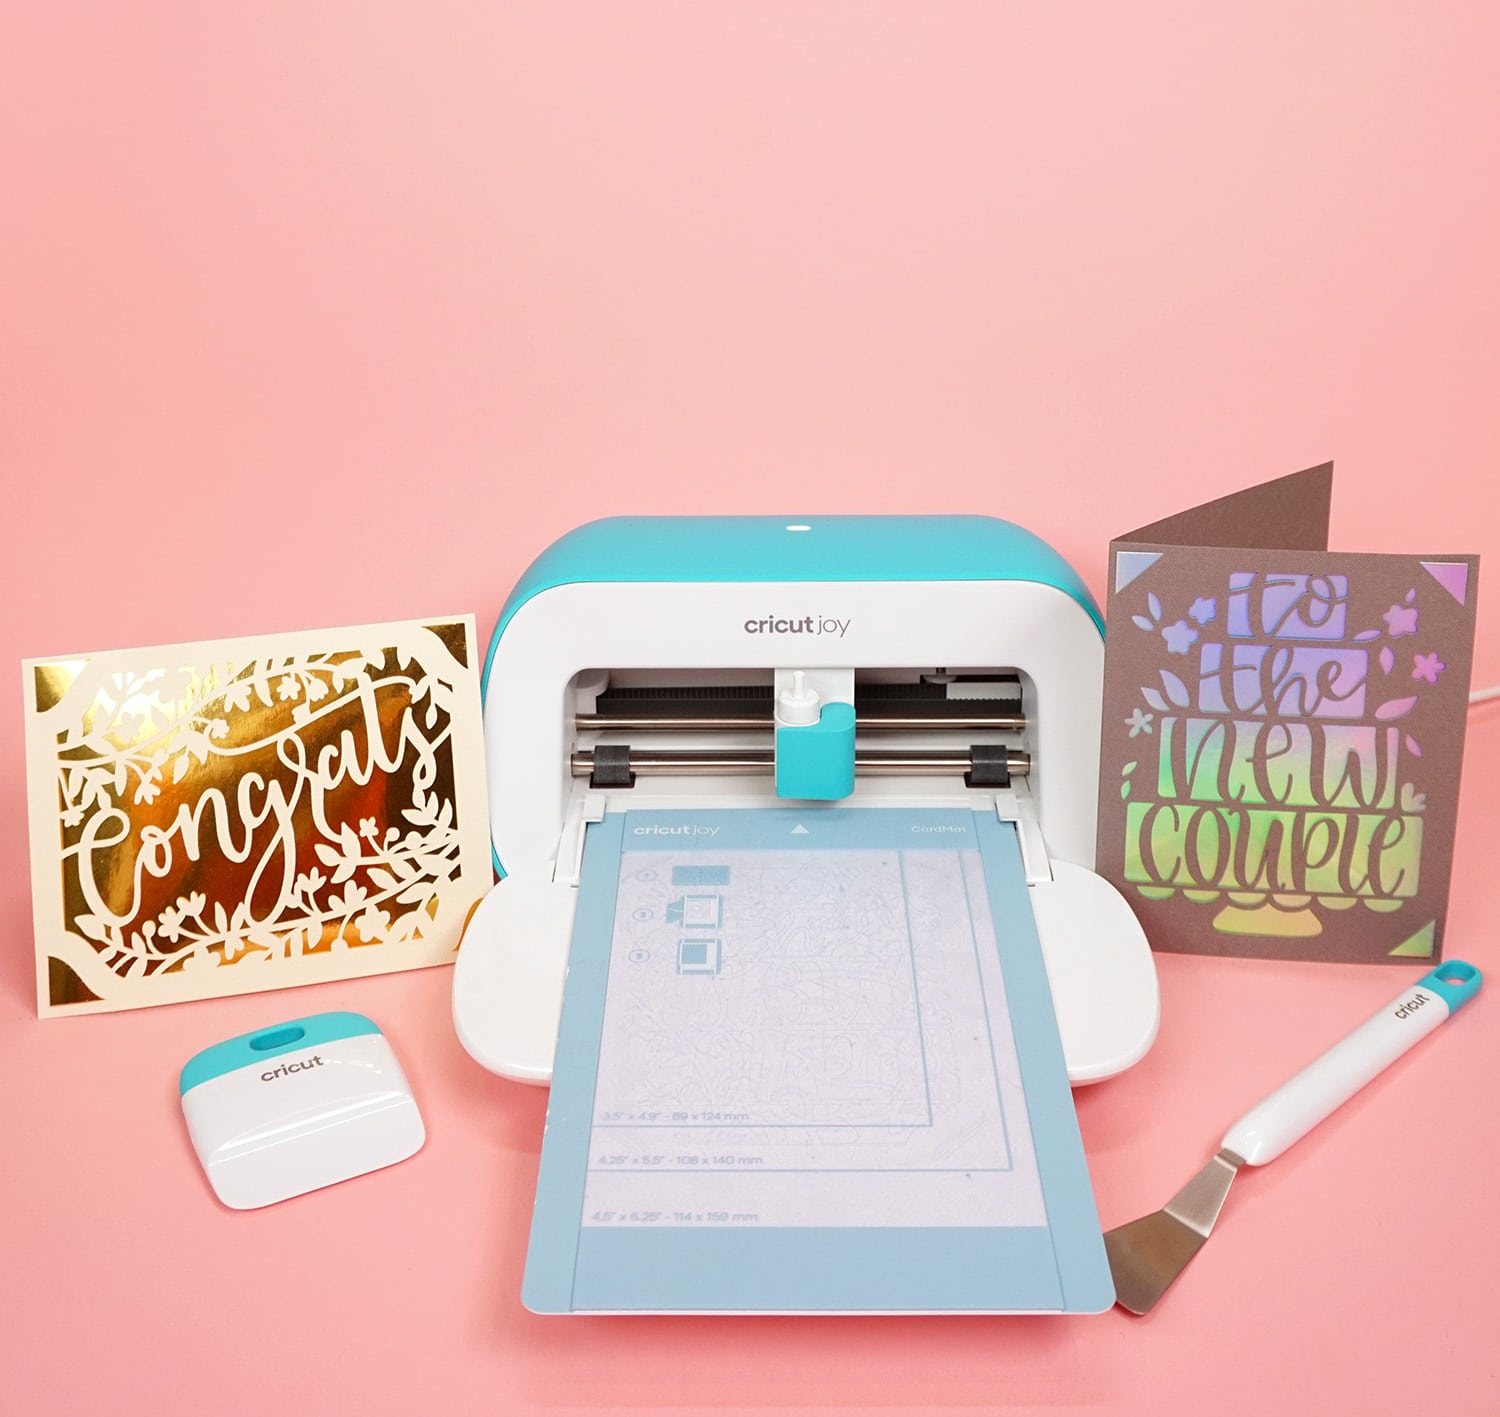 How to Use the Cricut Joy Card Mat & Insert Cards - Happiness is